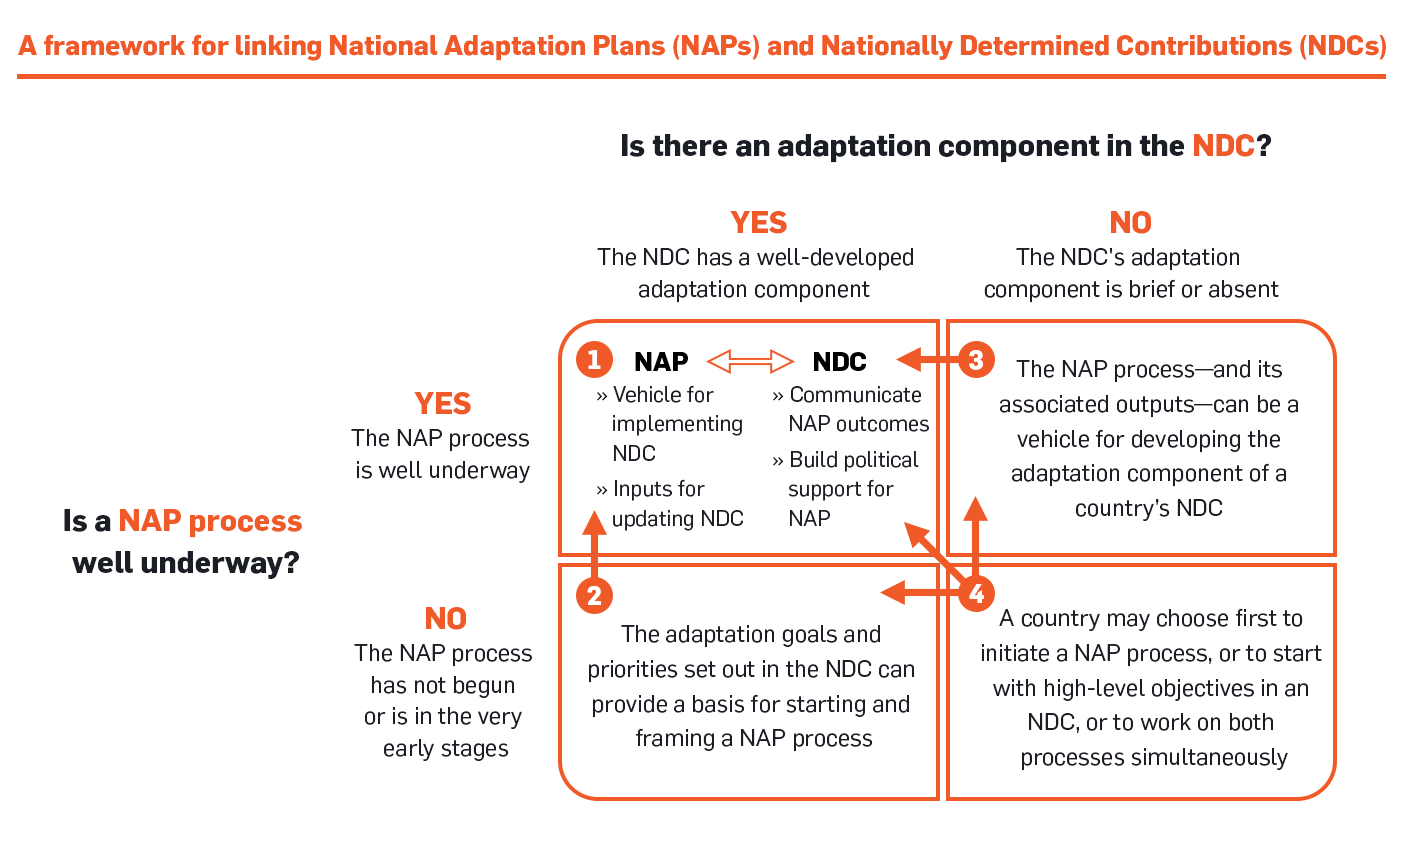 A framework for linking NAPs and NDCs